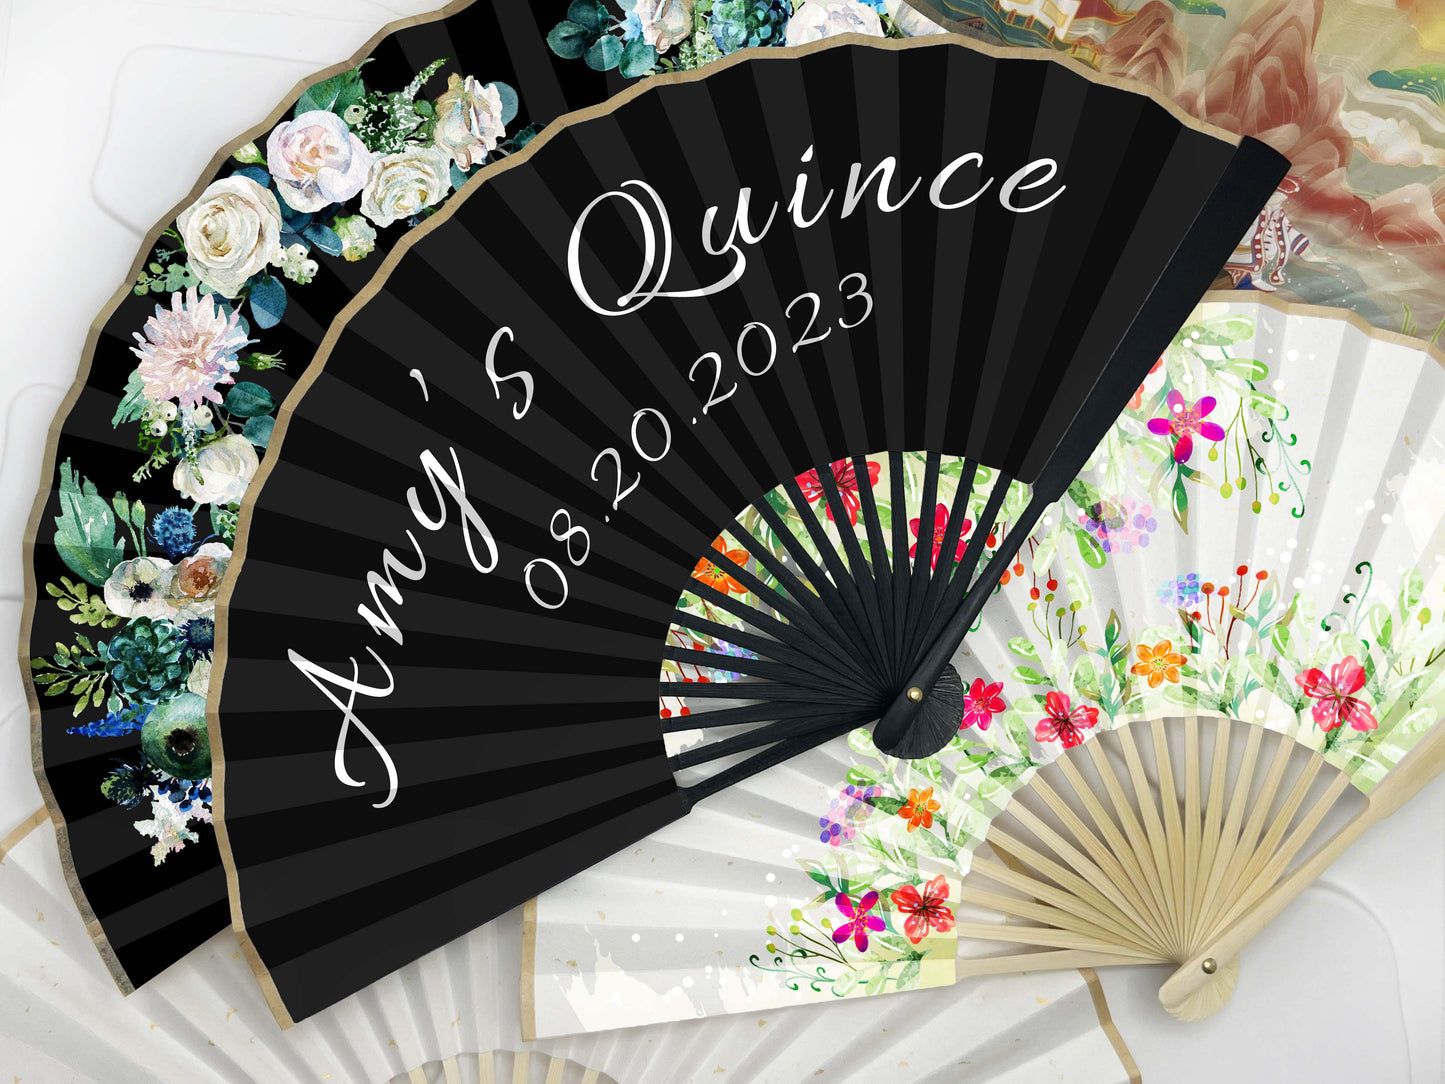 High End Personalized Custom Fans Lemon Orange Printed Folding Hand Fans Wedding Party Favors Gifts for Guests Bulk